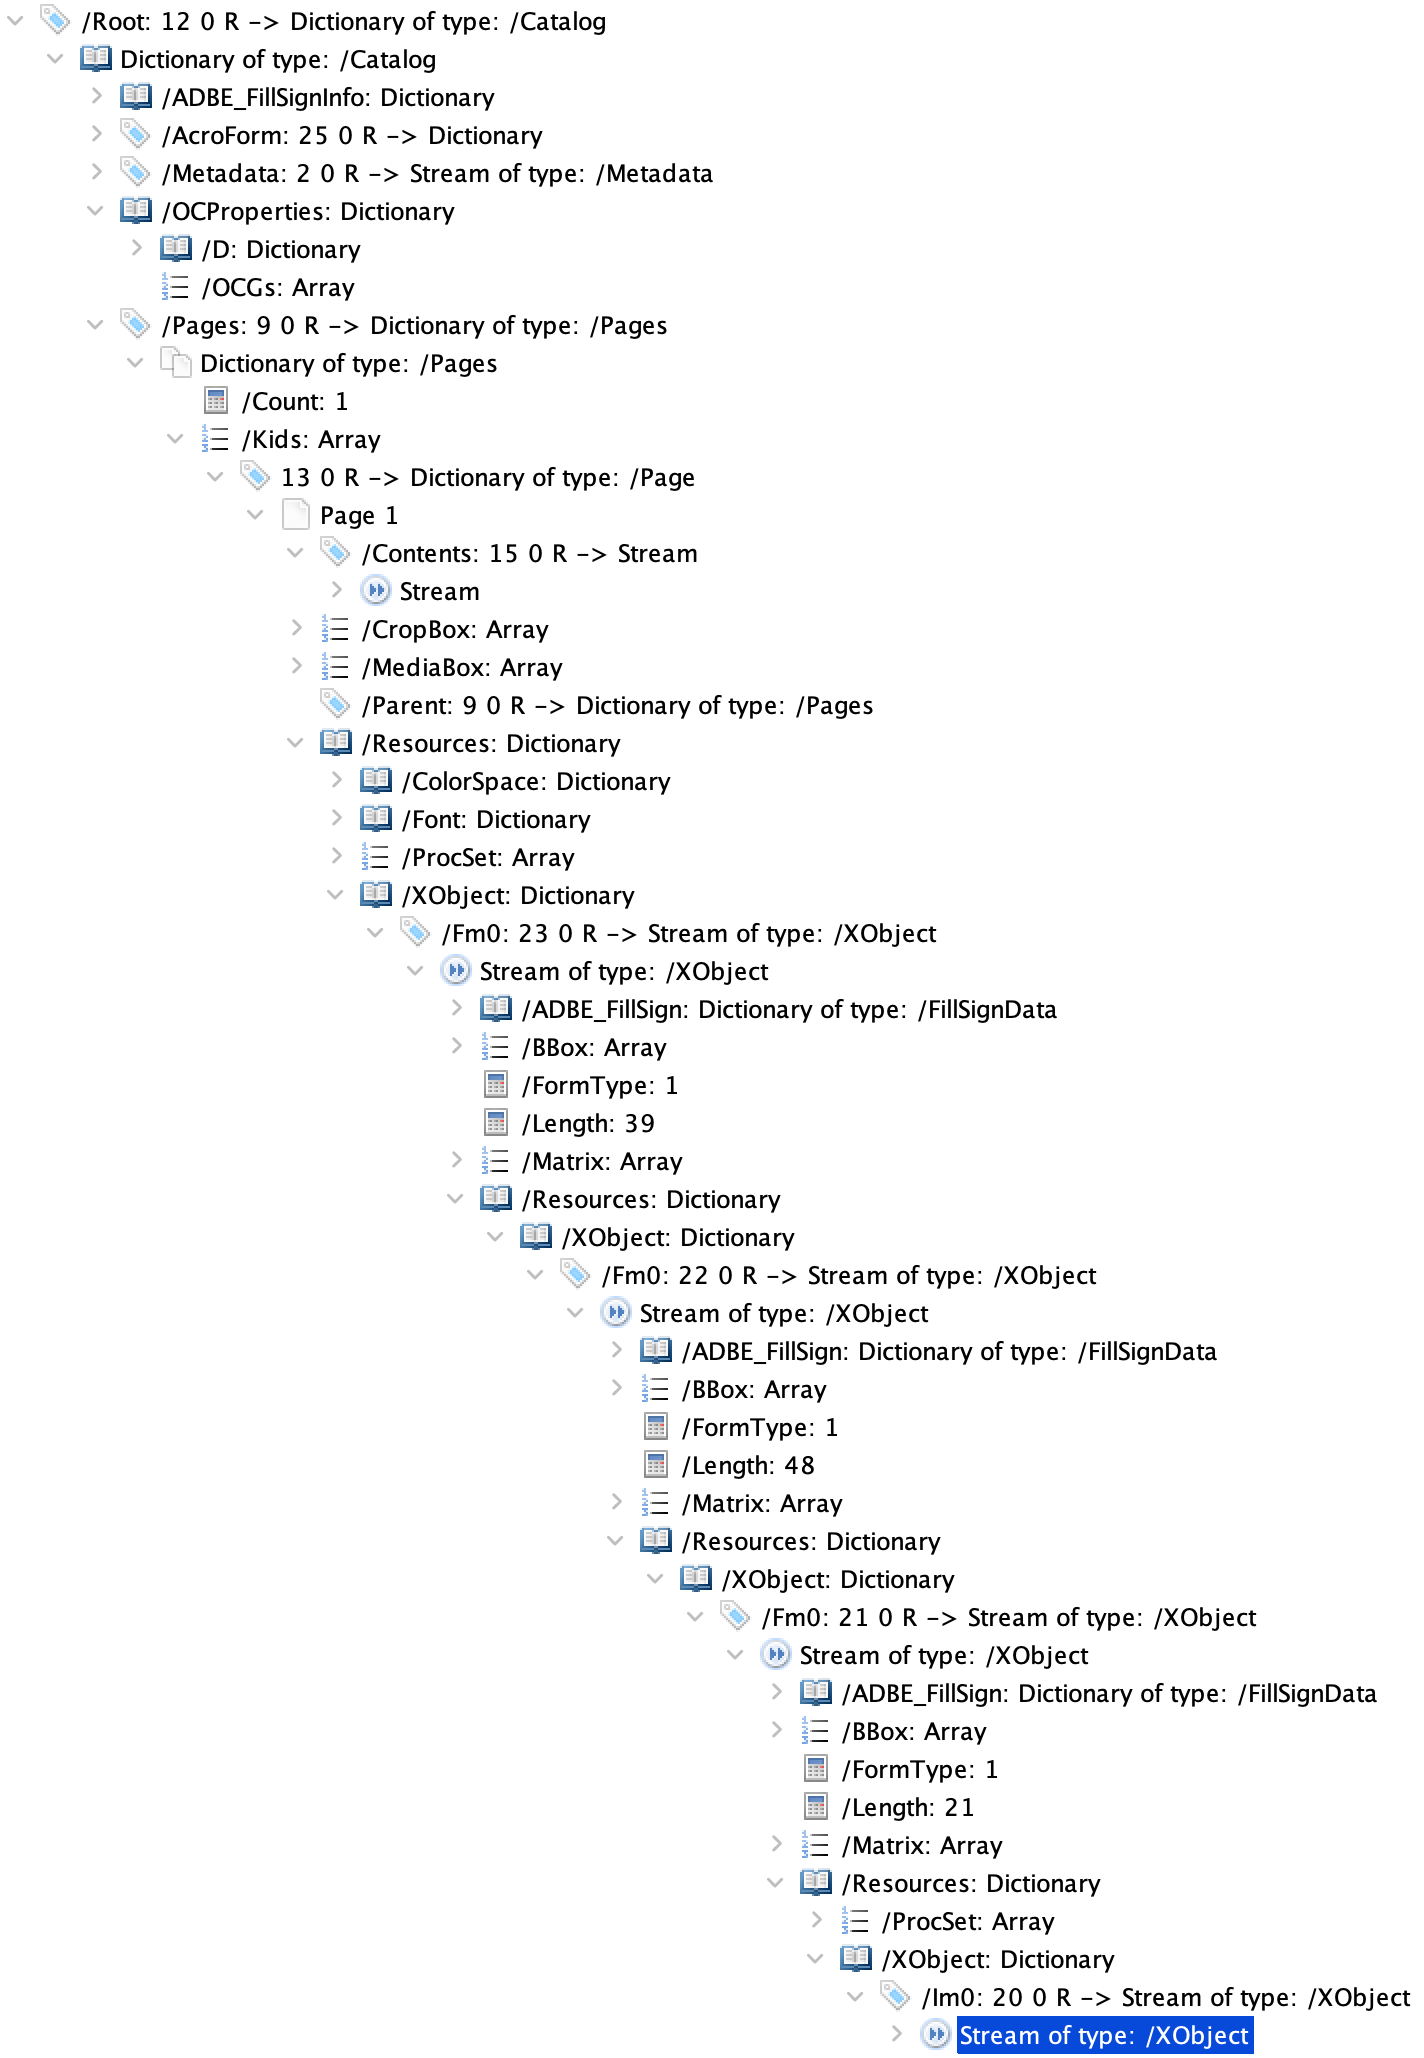 Hierarchical tree structure of the PDF signed with Acrobat, showing complex AcroForm structure.